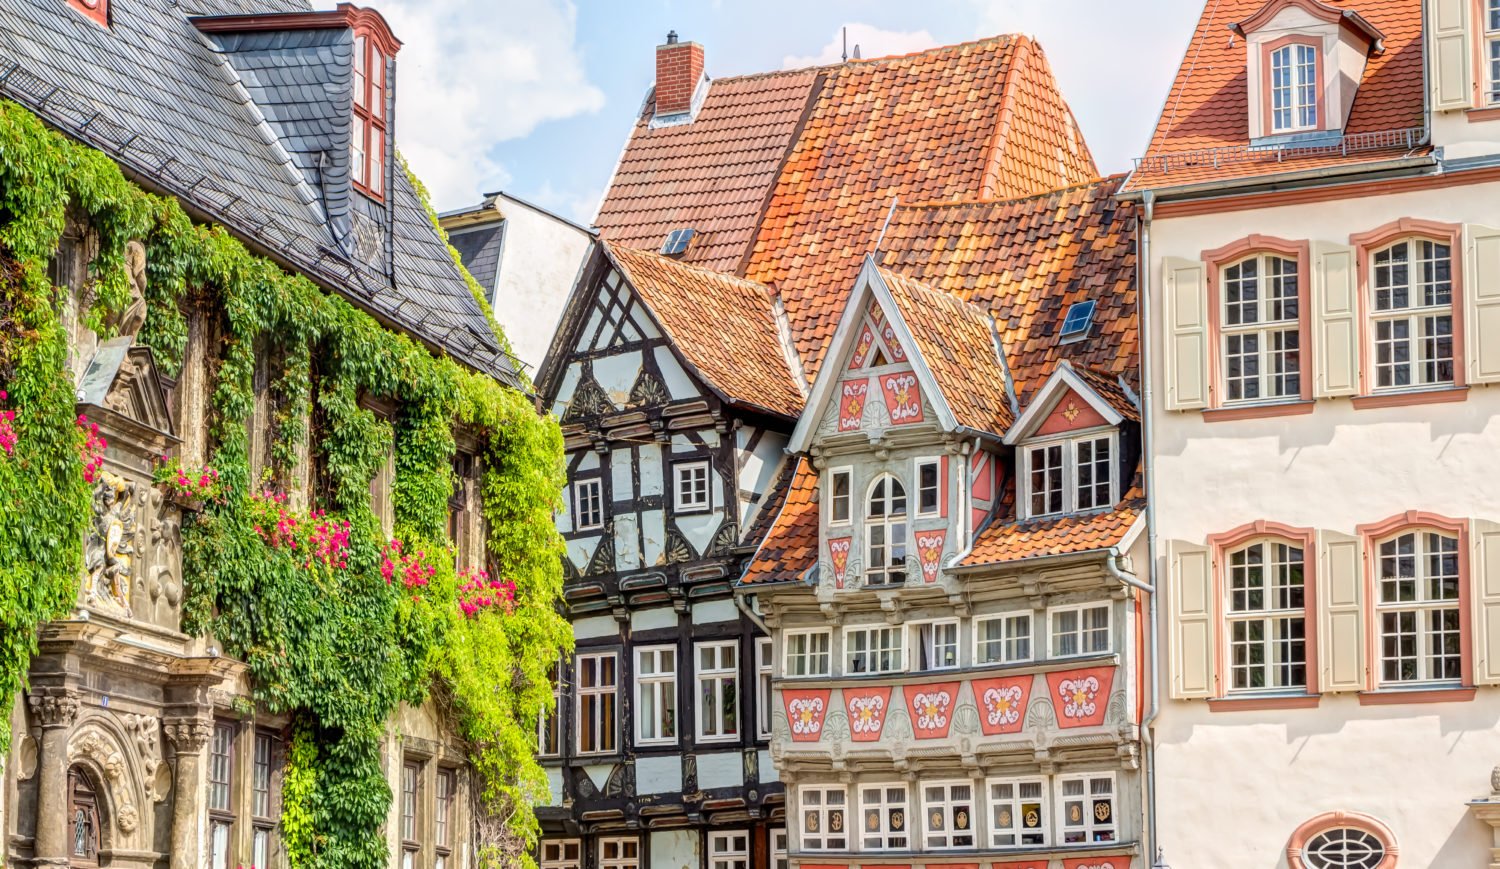 If you travel with the Selketalbahn, you should definitely make a stop. For example, in Quedlinburg with its historic old town